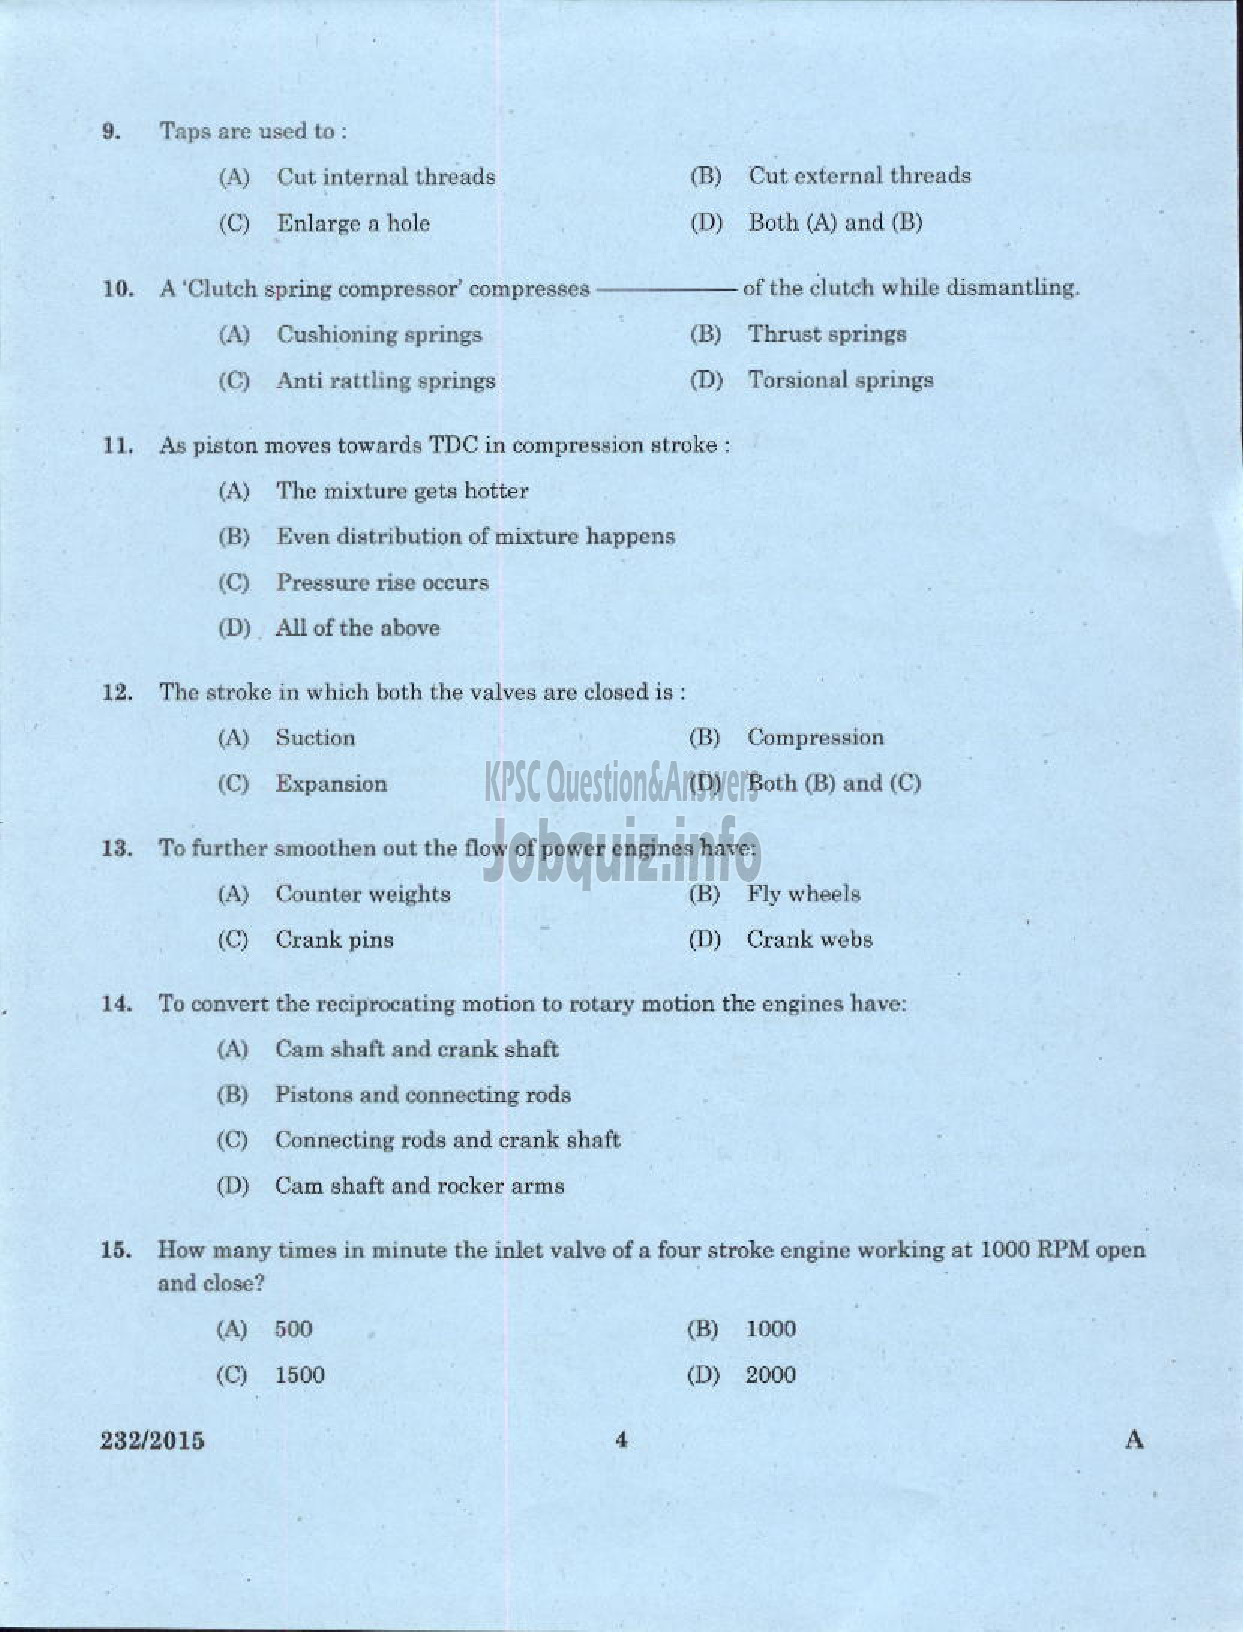 Kerala PSC Question Paper - MOTOR MECHANIC/STORE ASSISTANT GROUND WATER-2